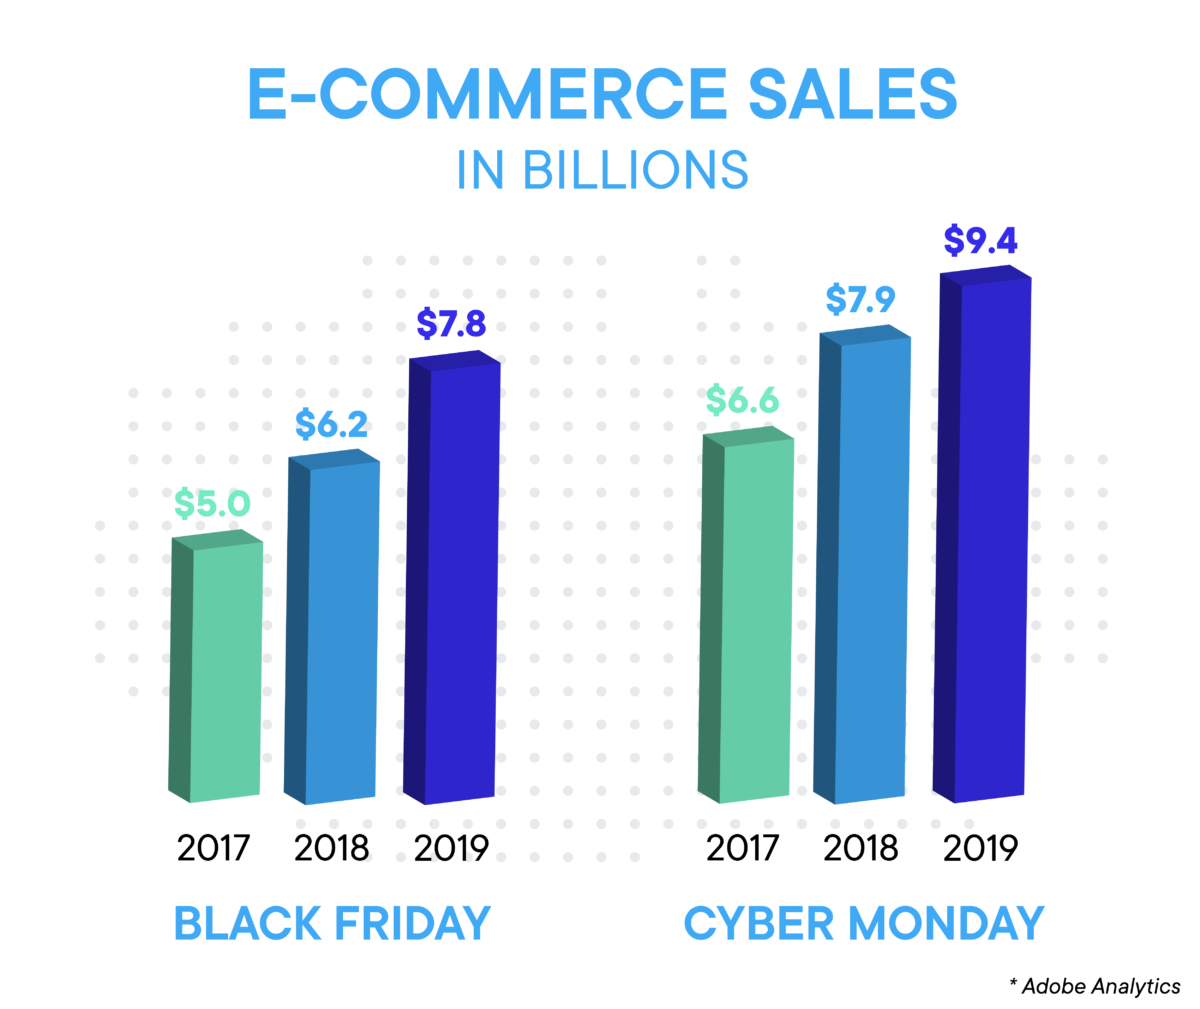 E-commerce sales for Black Friday and Cyber Monday in 2017-2019